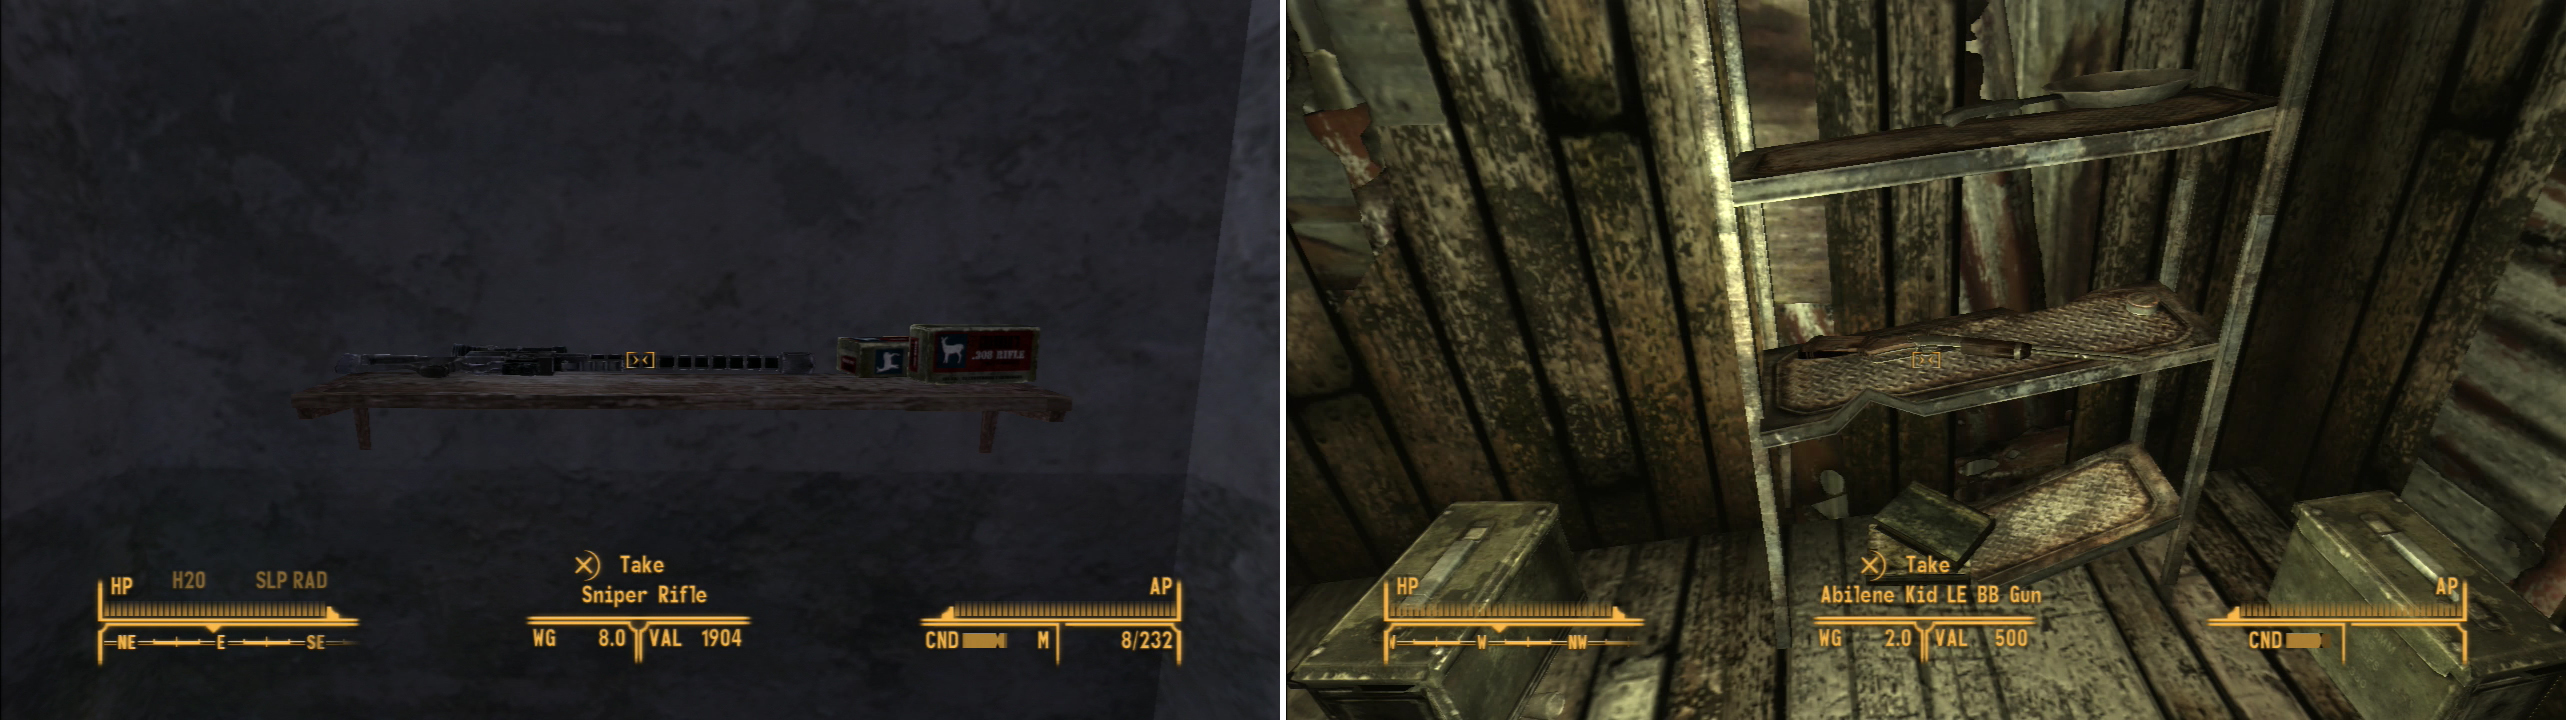 In a trapped house near the New Vegas Medical Center you can find some nice loot, including a Sniper Rifle (left). In Field’s Shack you can score the Abilene Kind LE BB Gun (right). Don’t shoot your eye out!